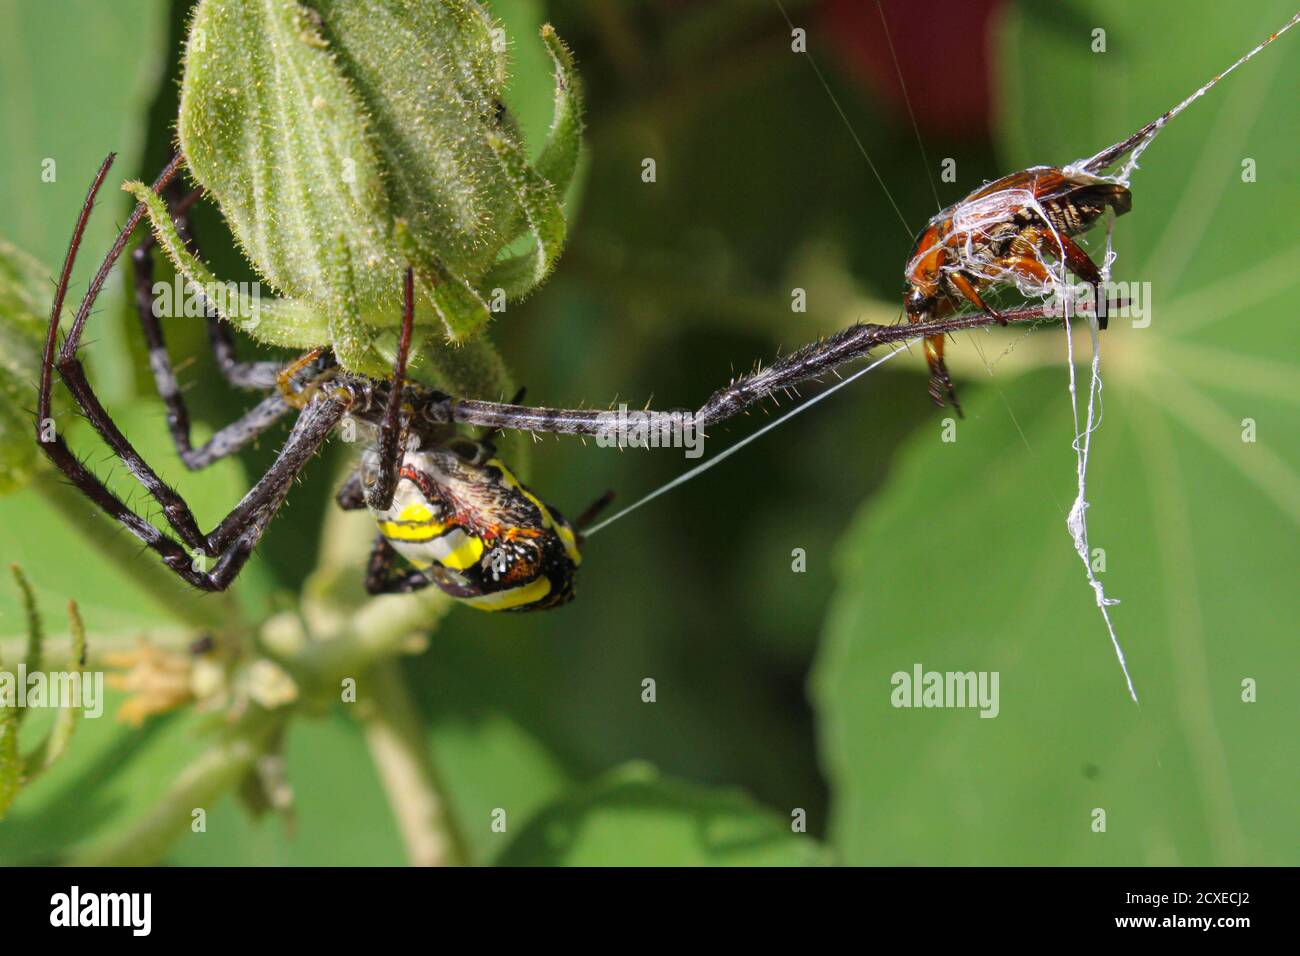 beatyful spider,Spider eating insect and siting on the net,spider in asis Stock Photo